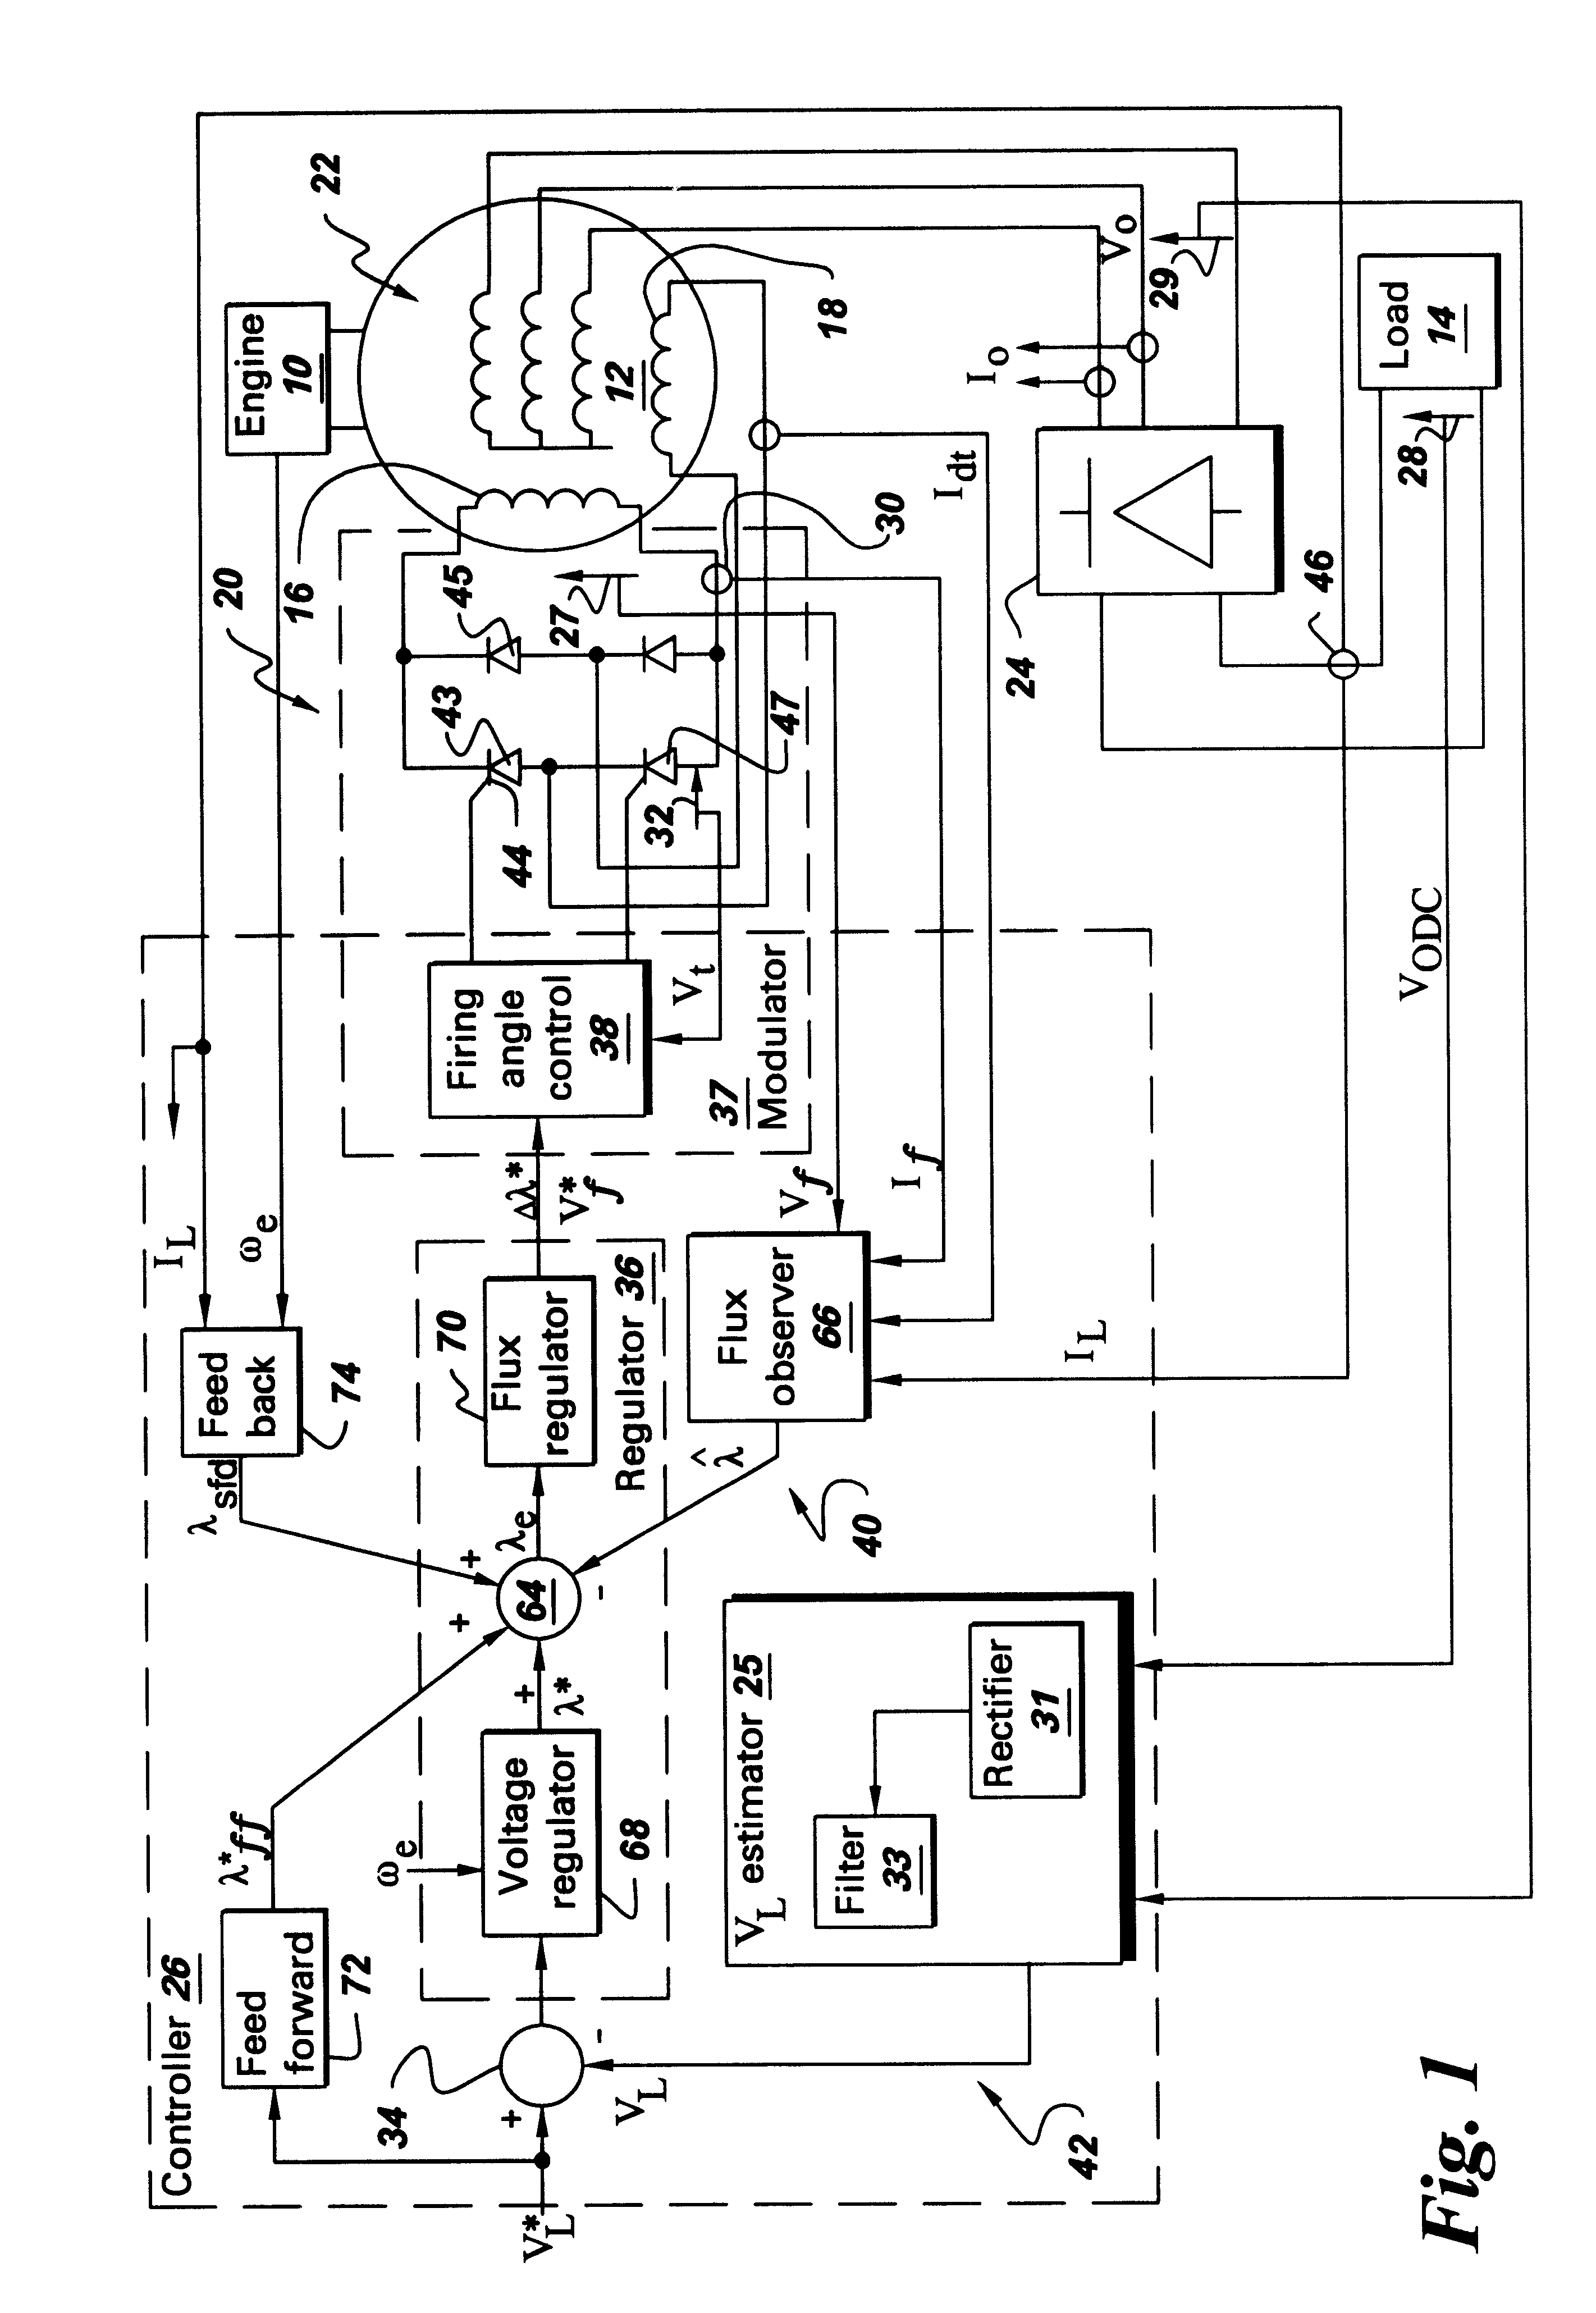 Wound field synchronous machine control system and method